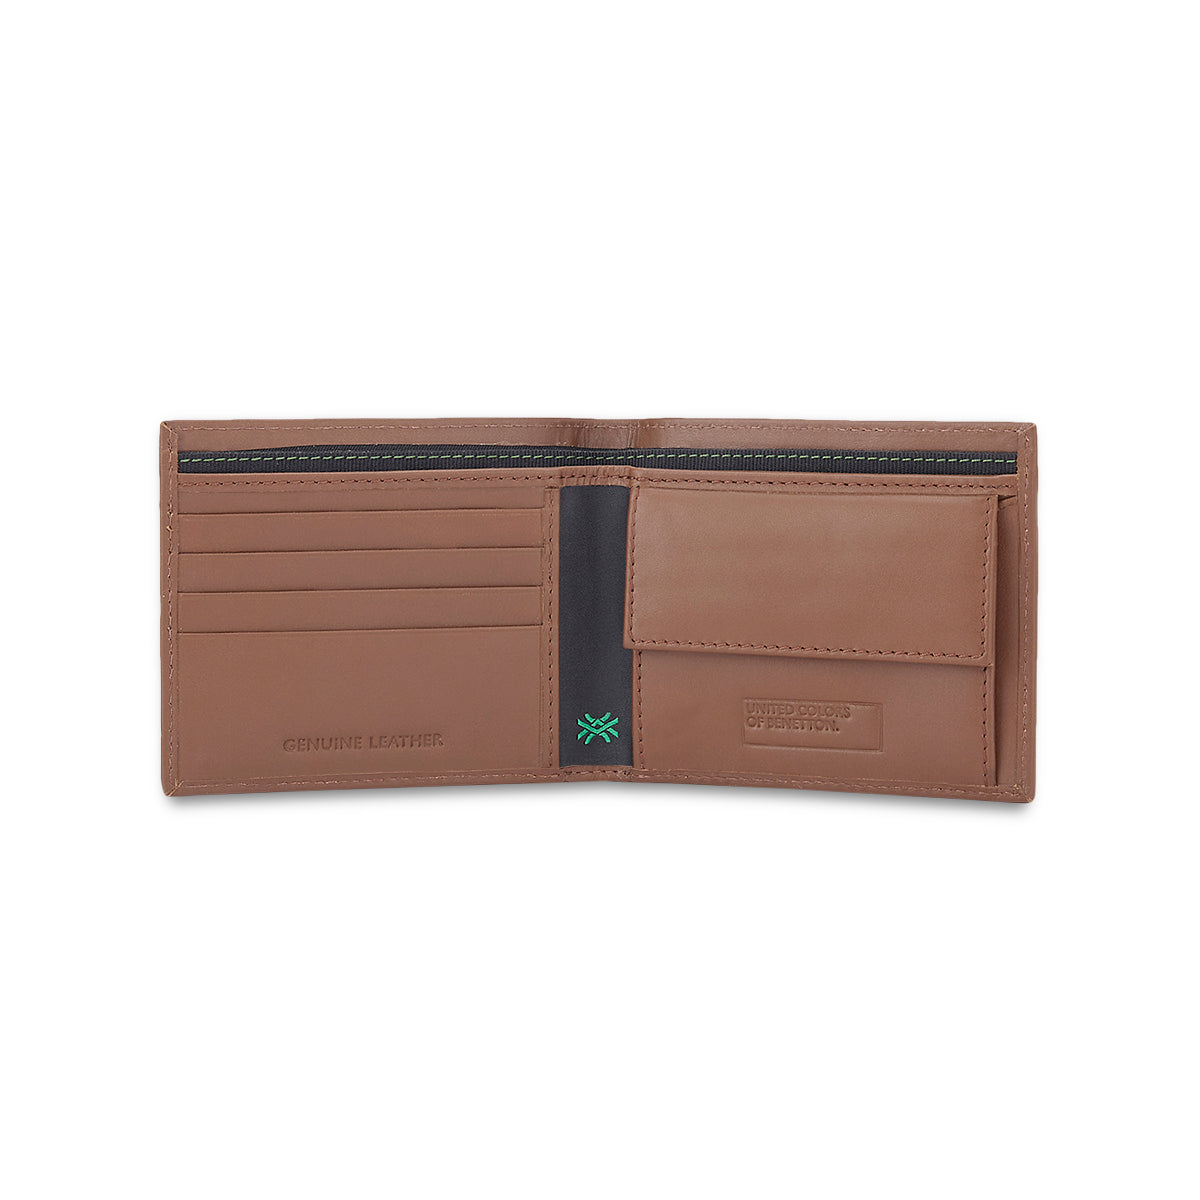 United Colors of Benetton Ackley Men’s Global Coin Leather Wallet-Tan